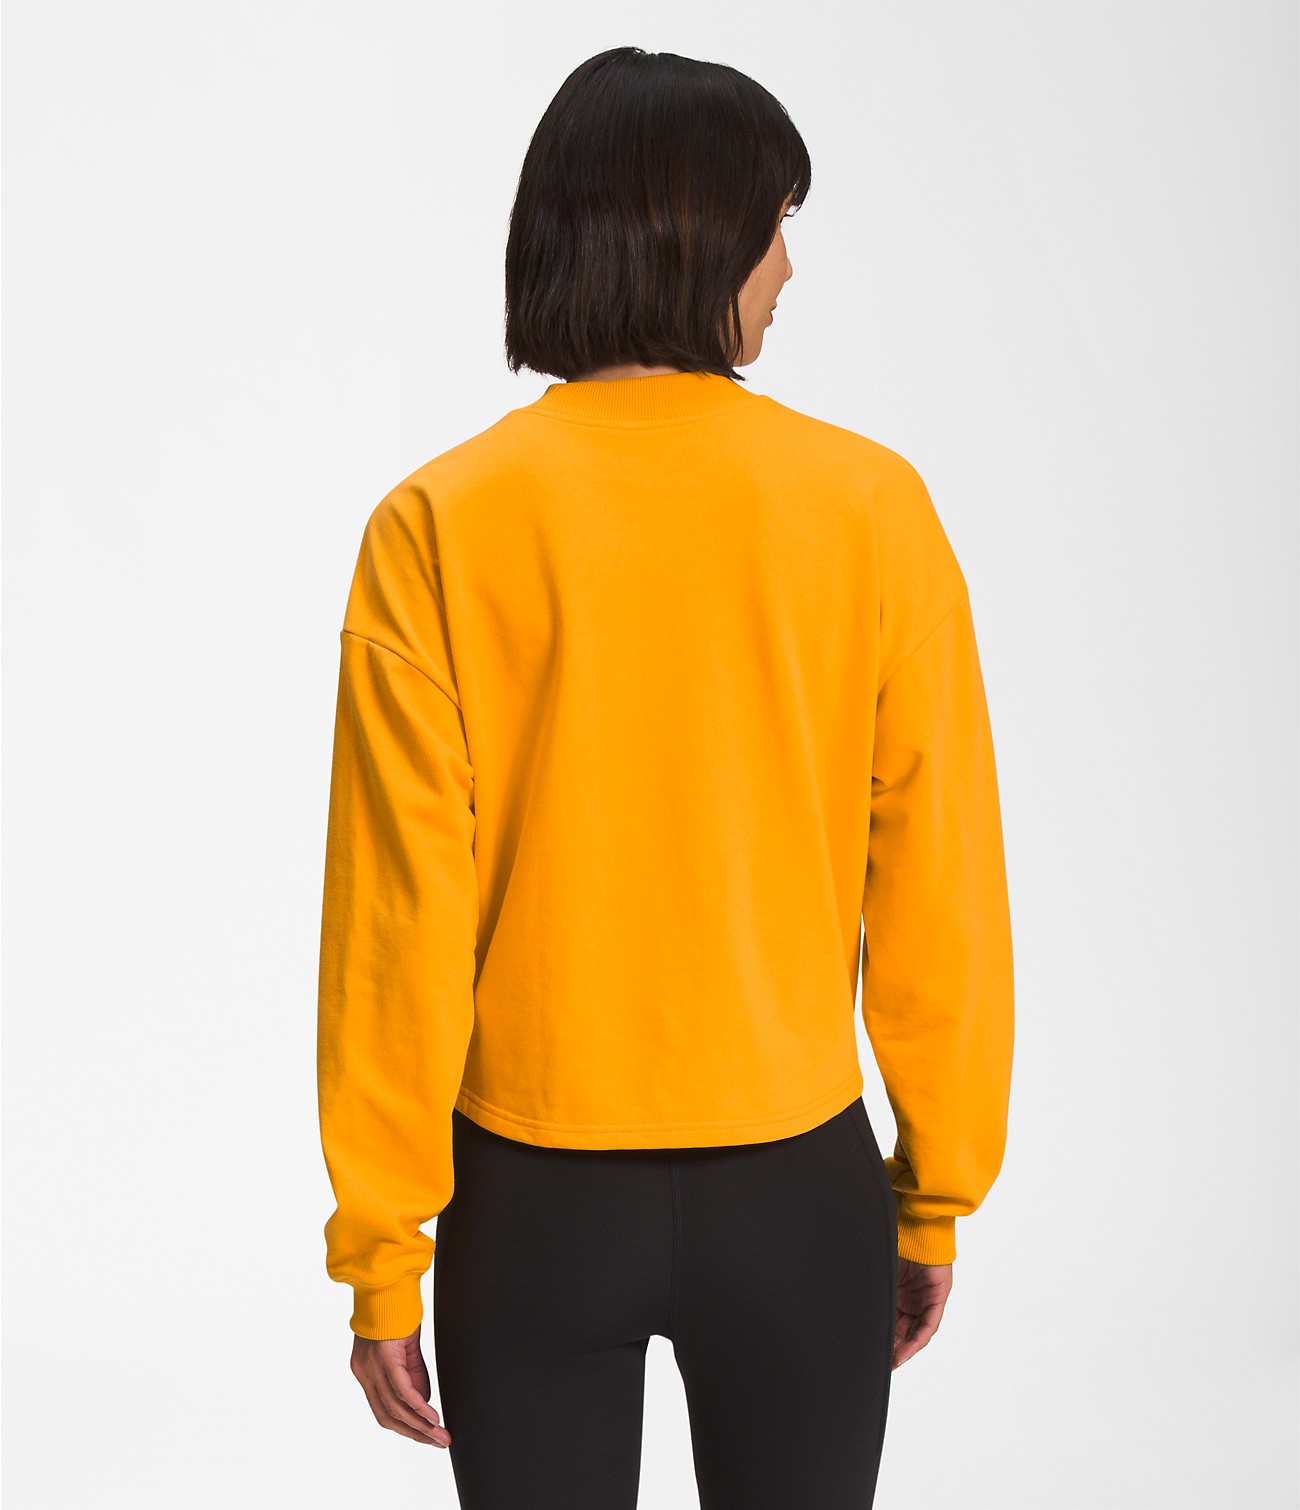 Women’s Simple Logo Crew | The North Face